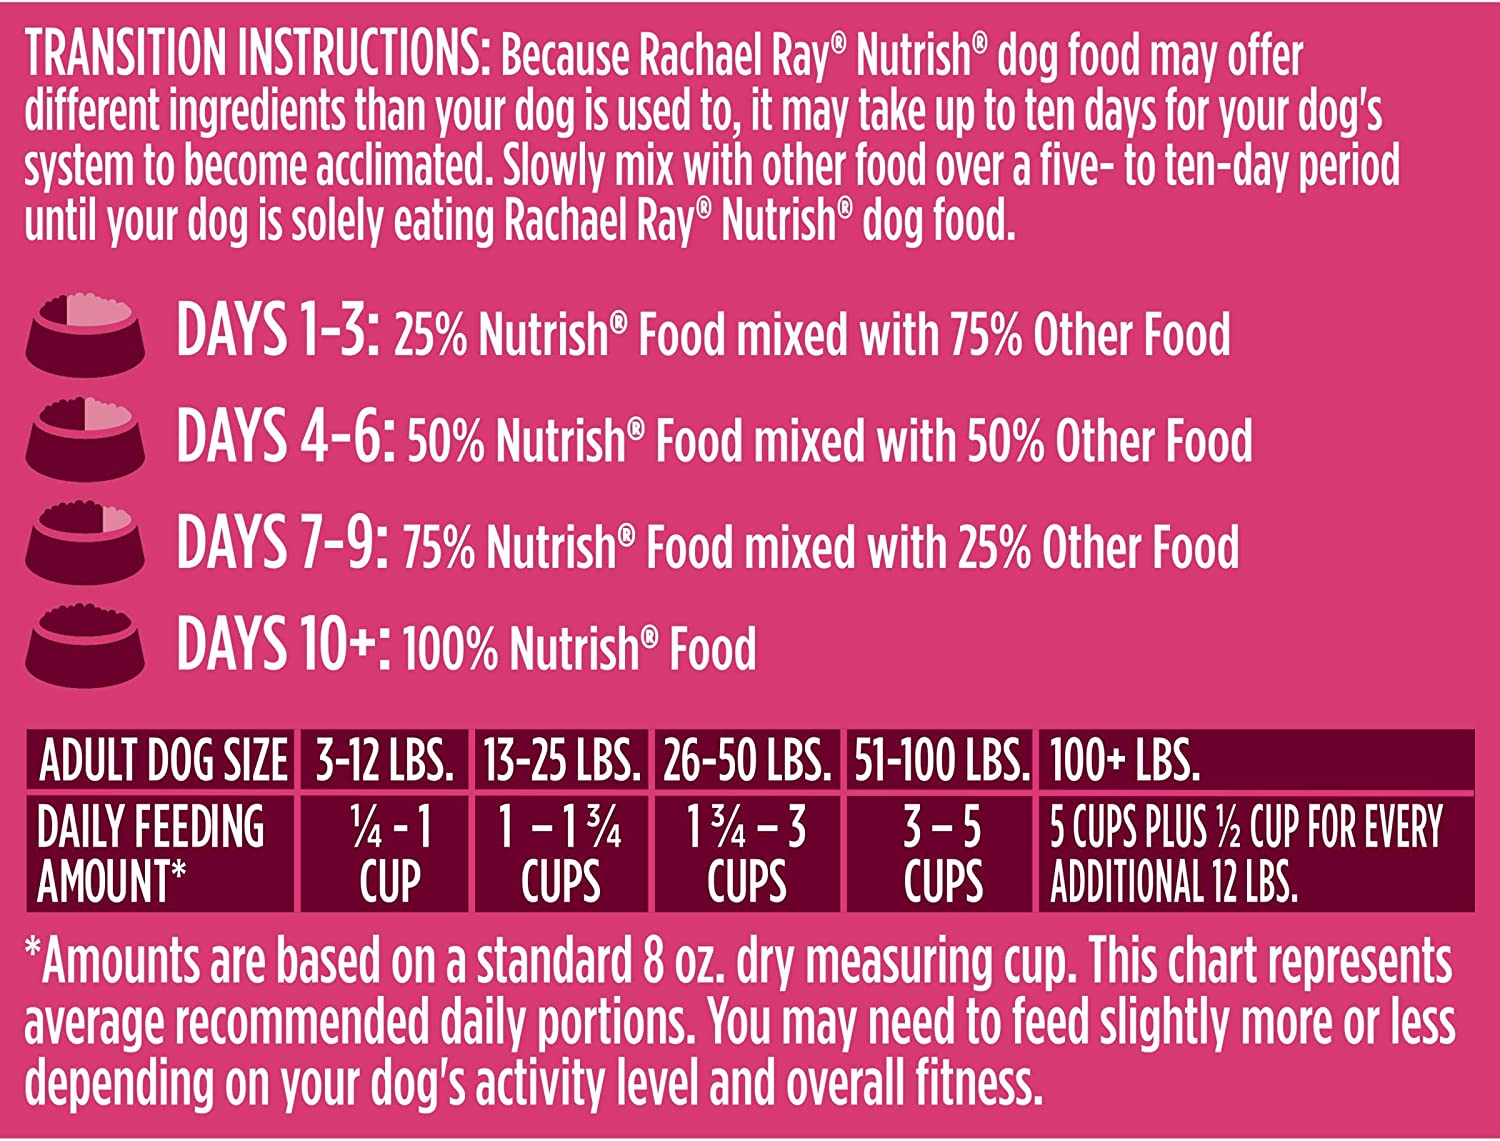 Rachael Ray Nutrish PEAK Natural Dry Dog Food, Open Prairie Recipe with Beef, Venison & Lamb, 23 Pounds, Grain Free (Packaging May Vary)